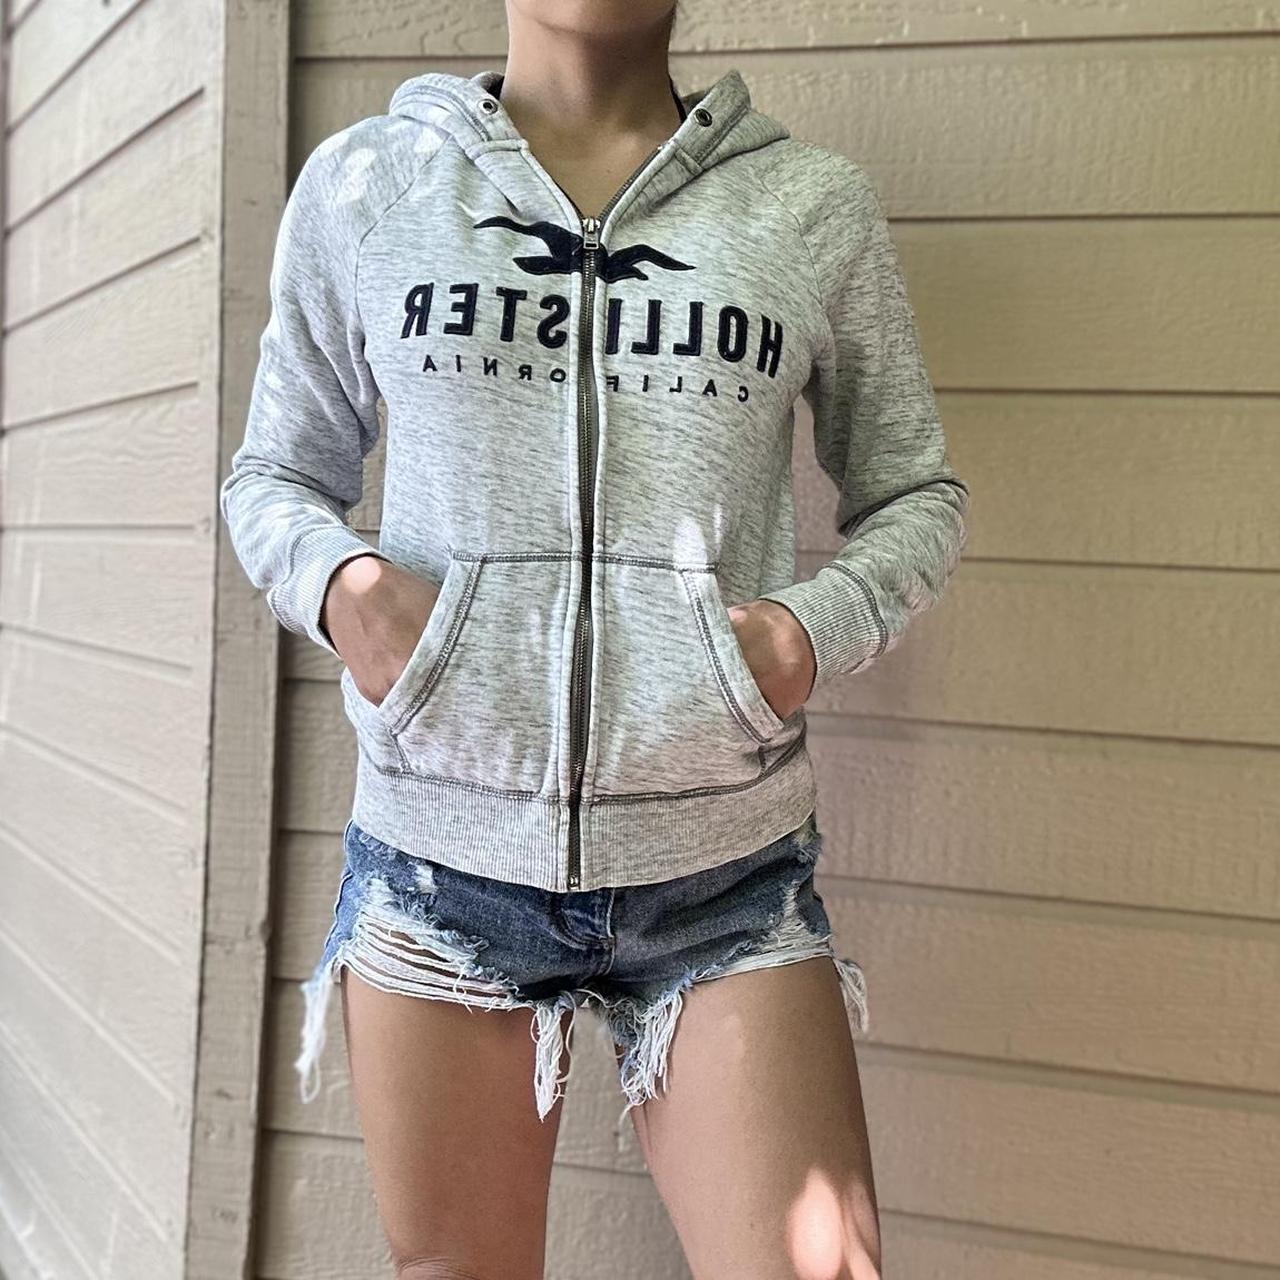 hollister grey zip up hoodie , Size small , In great